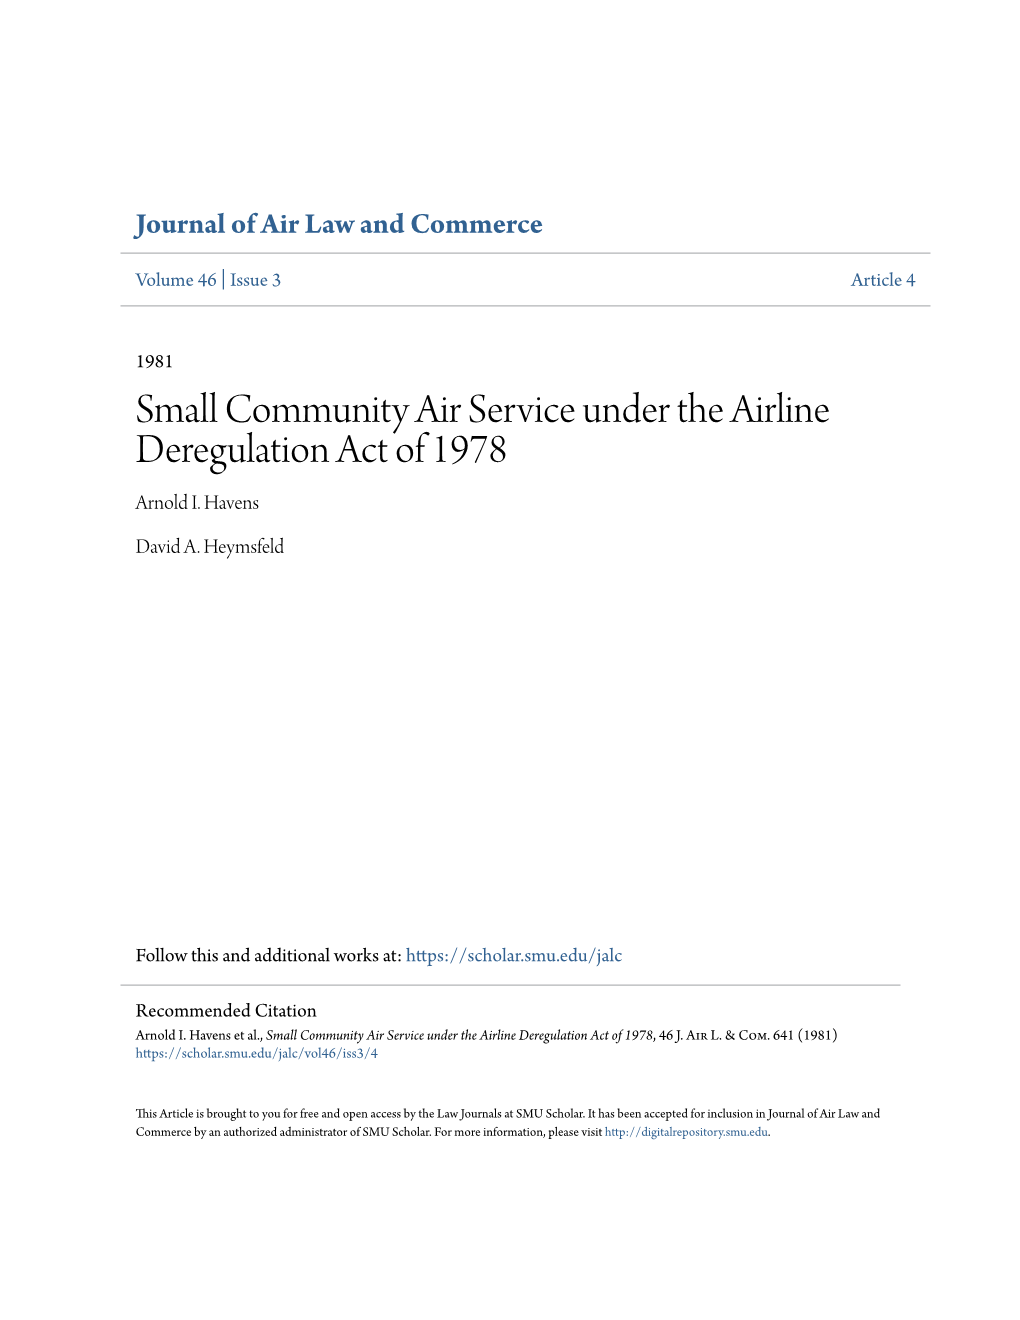 Small Community Air Service Under the Airline Deregulation Act of 1978 Arnold I